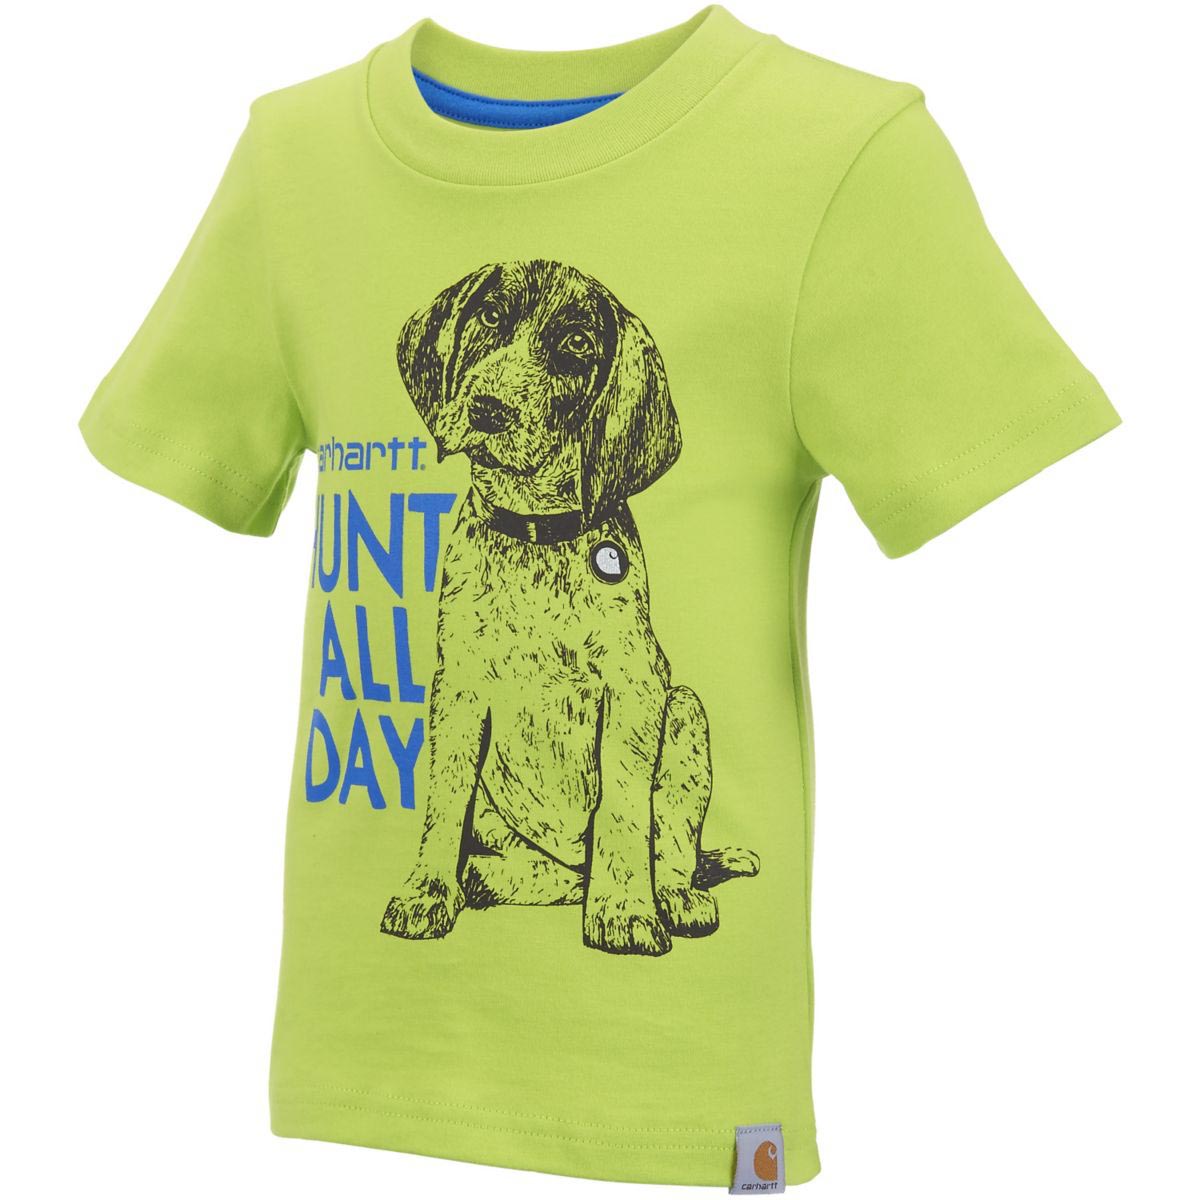 Carhartt Infant and Toddler Boys Hunt All Day Tee